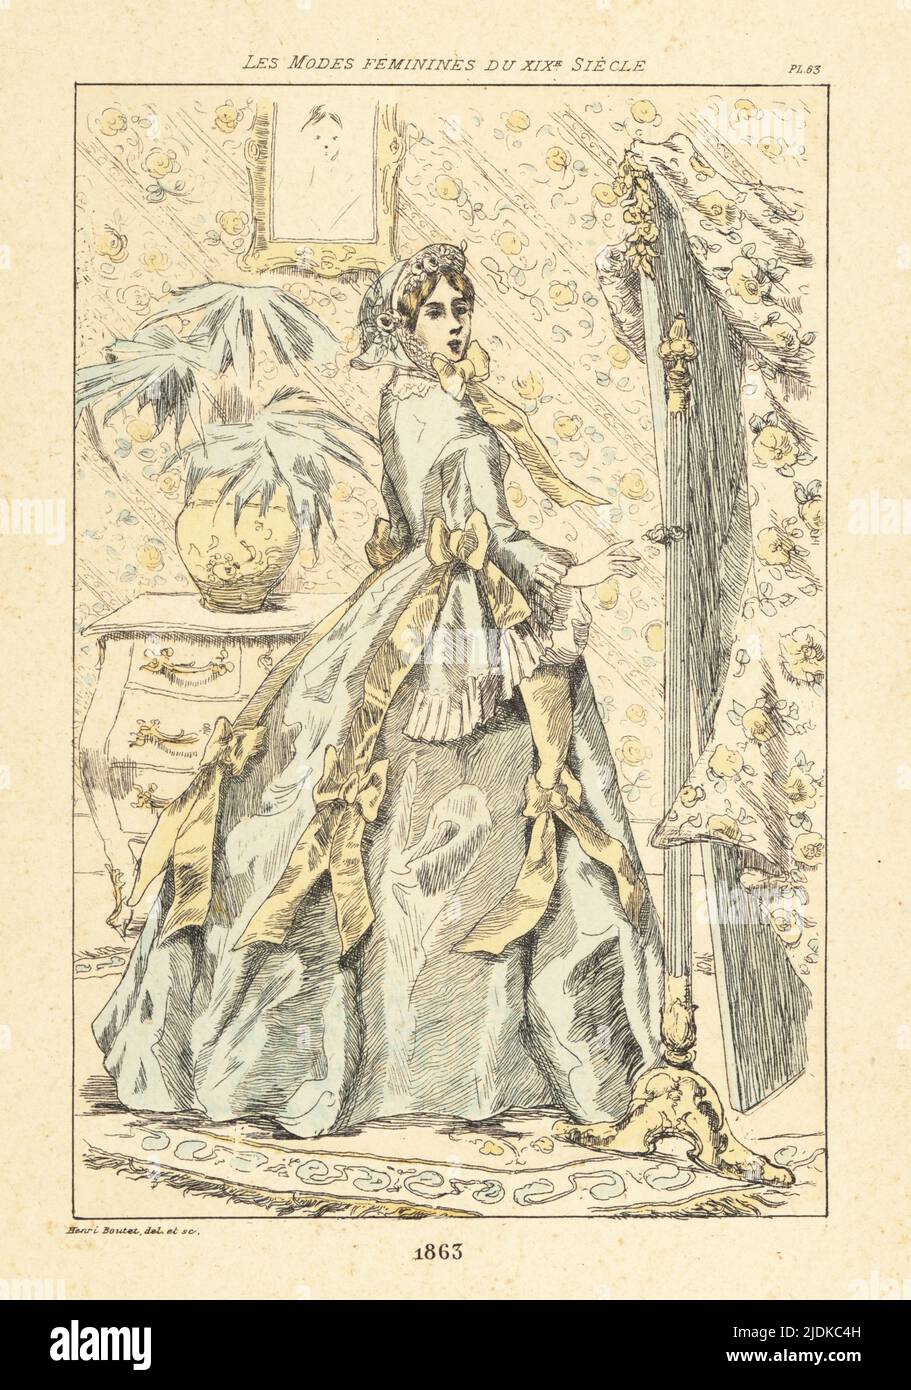 Fashionable lady in a parlor with palm pot plant, Paris, 1863. In hat tied with ribbon, gown with fitted bodice, full skirts, decorated with ribbons. Standing in front of a mirror in a room with floral wallpaper. Handcoloured drypoint or pointe-seche etching by Henri Boutet from Les Modes Feminines du XIXeme Siecle (Feminine Fashions of the 19th Century), Ernest Flammarion, Paris, 1902. Boutet (1851-1919) was a French artist, engraver, lithographer and designer. Stock Photo